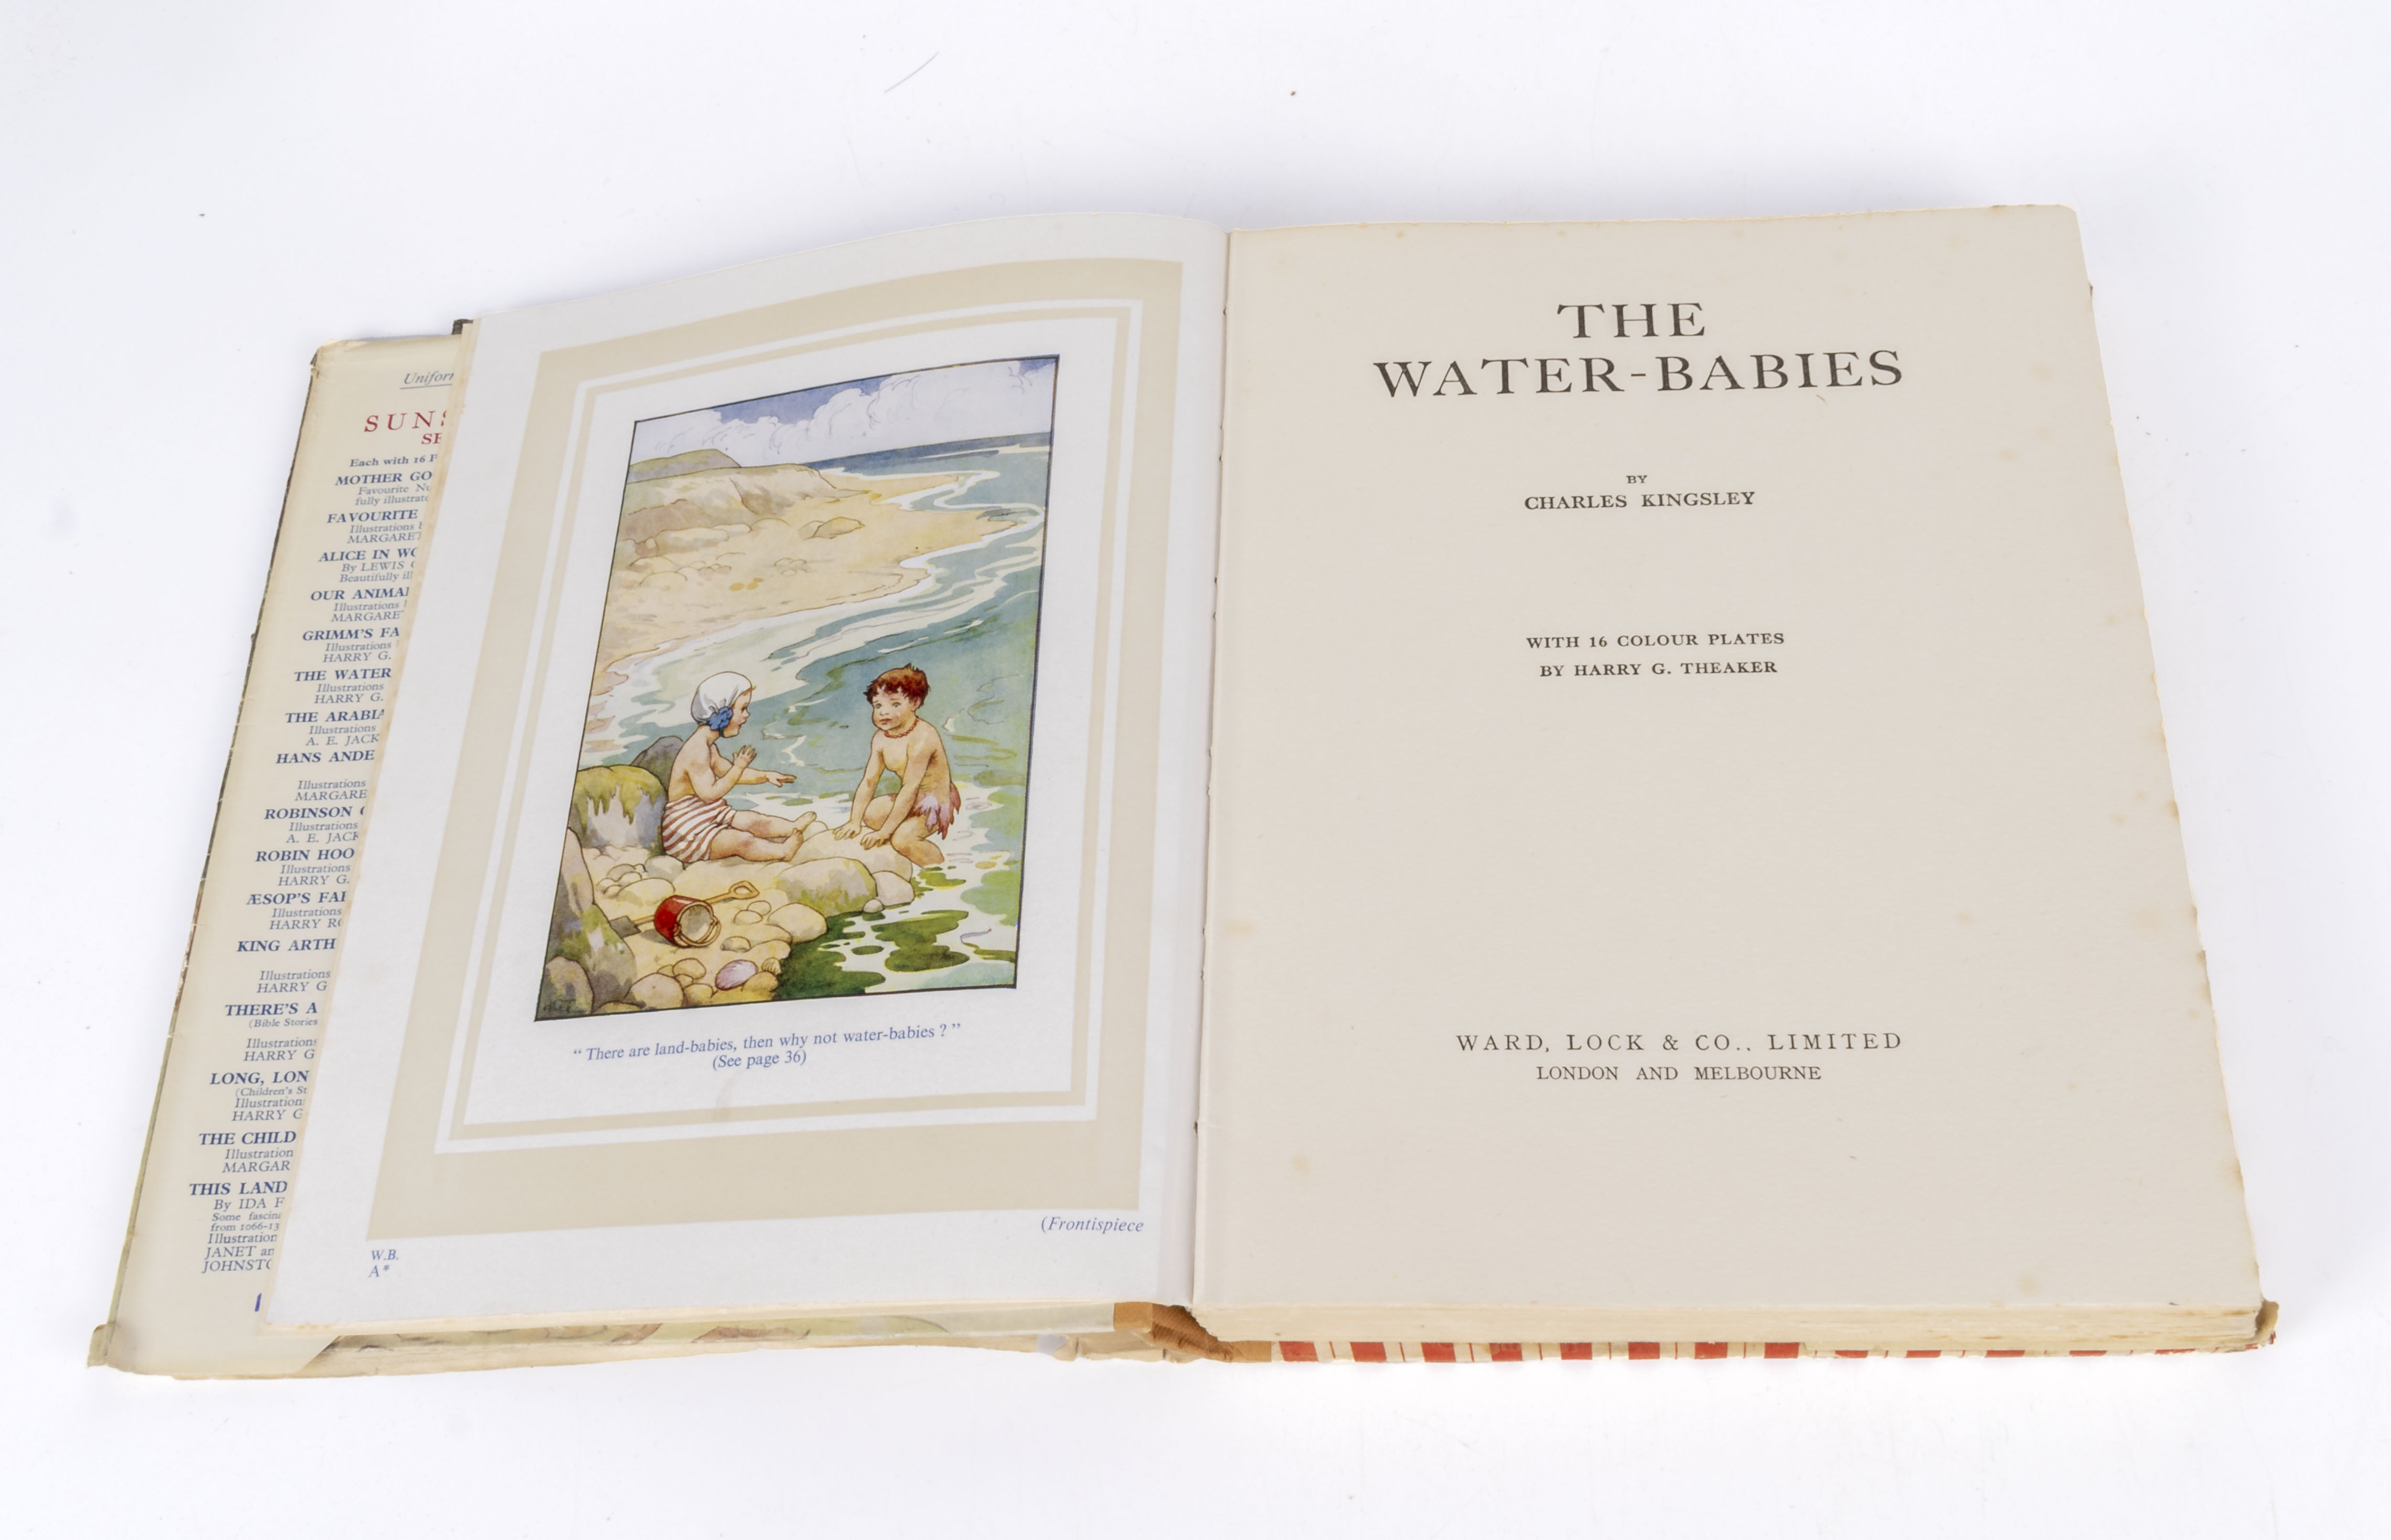 An edition of The Water Babies by Charles Kingsley, including 16 coloured plates by Harry G Theaker, - Image 3 of 6